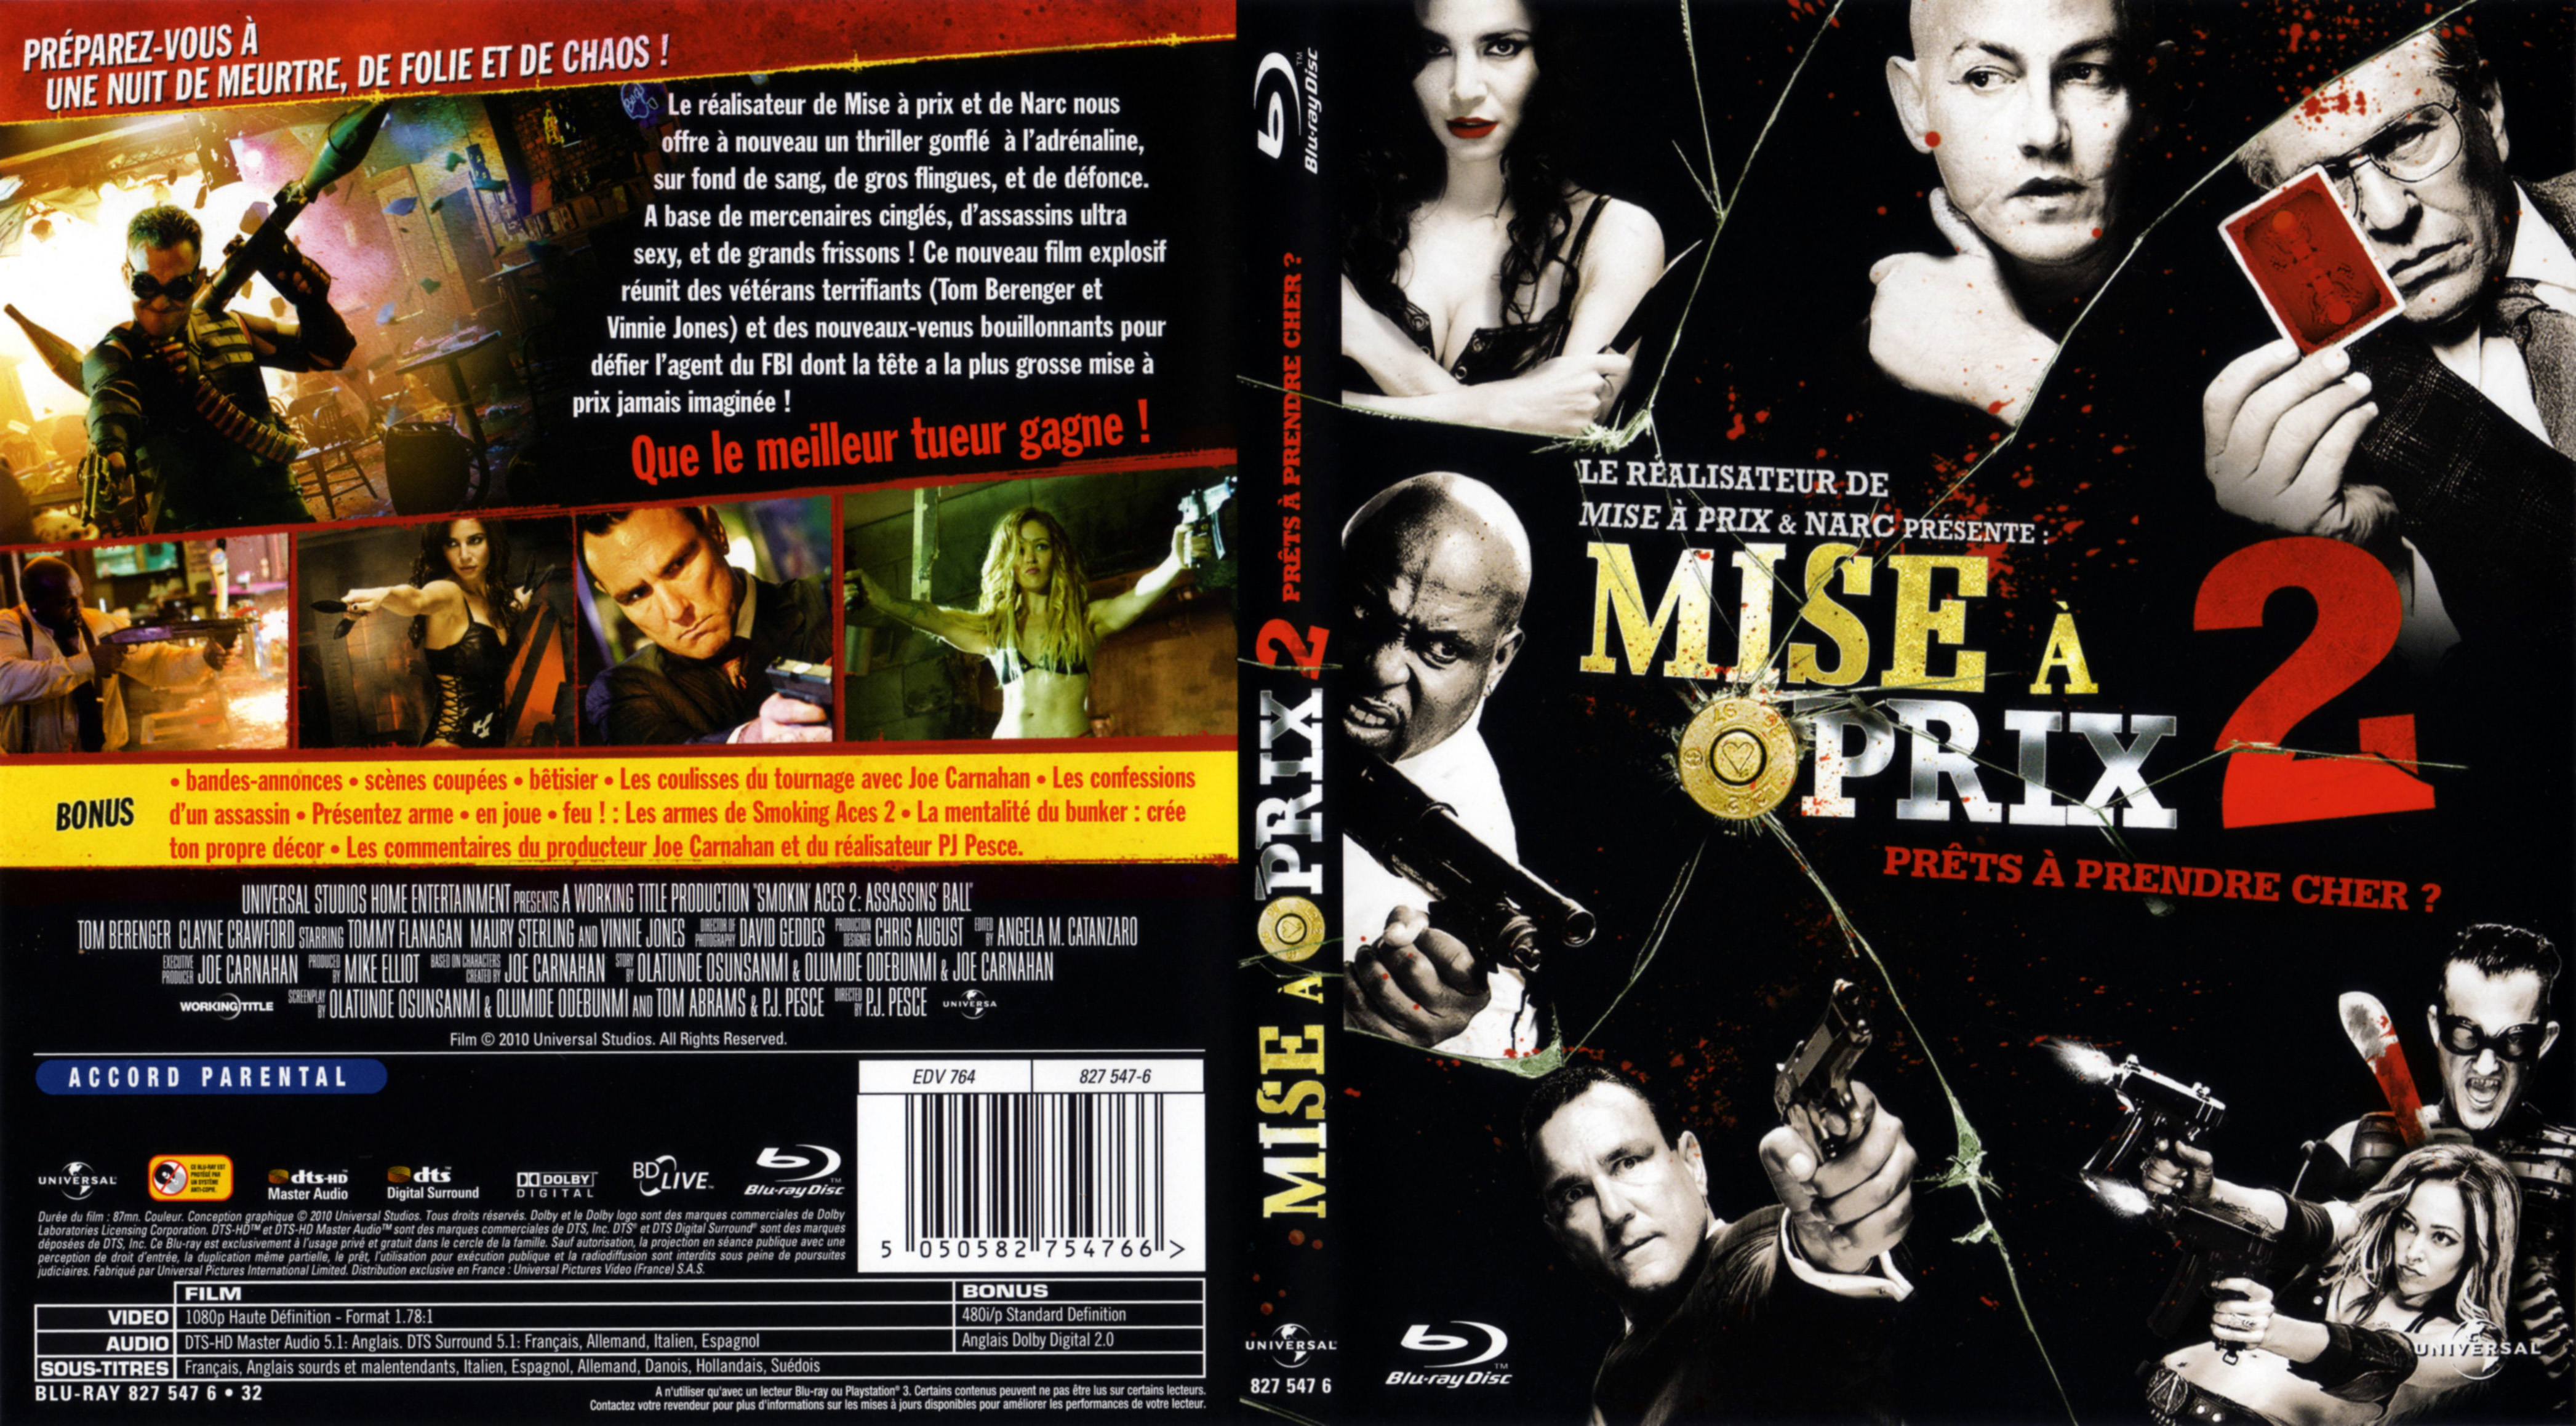 Jaquette DVD Mise a prix 2 (BLU-RAY)